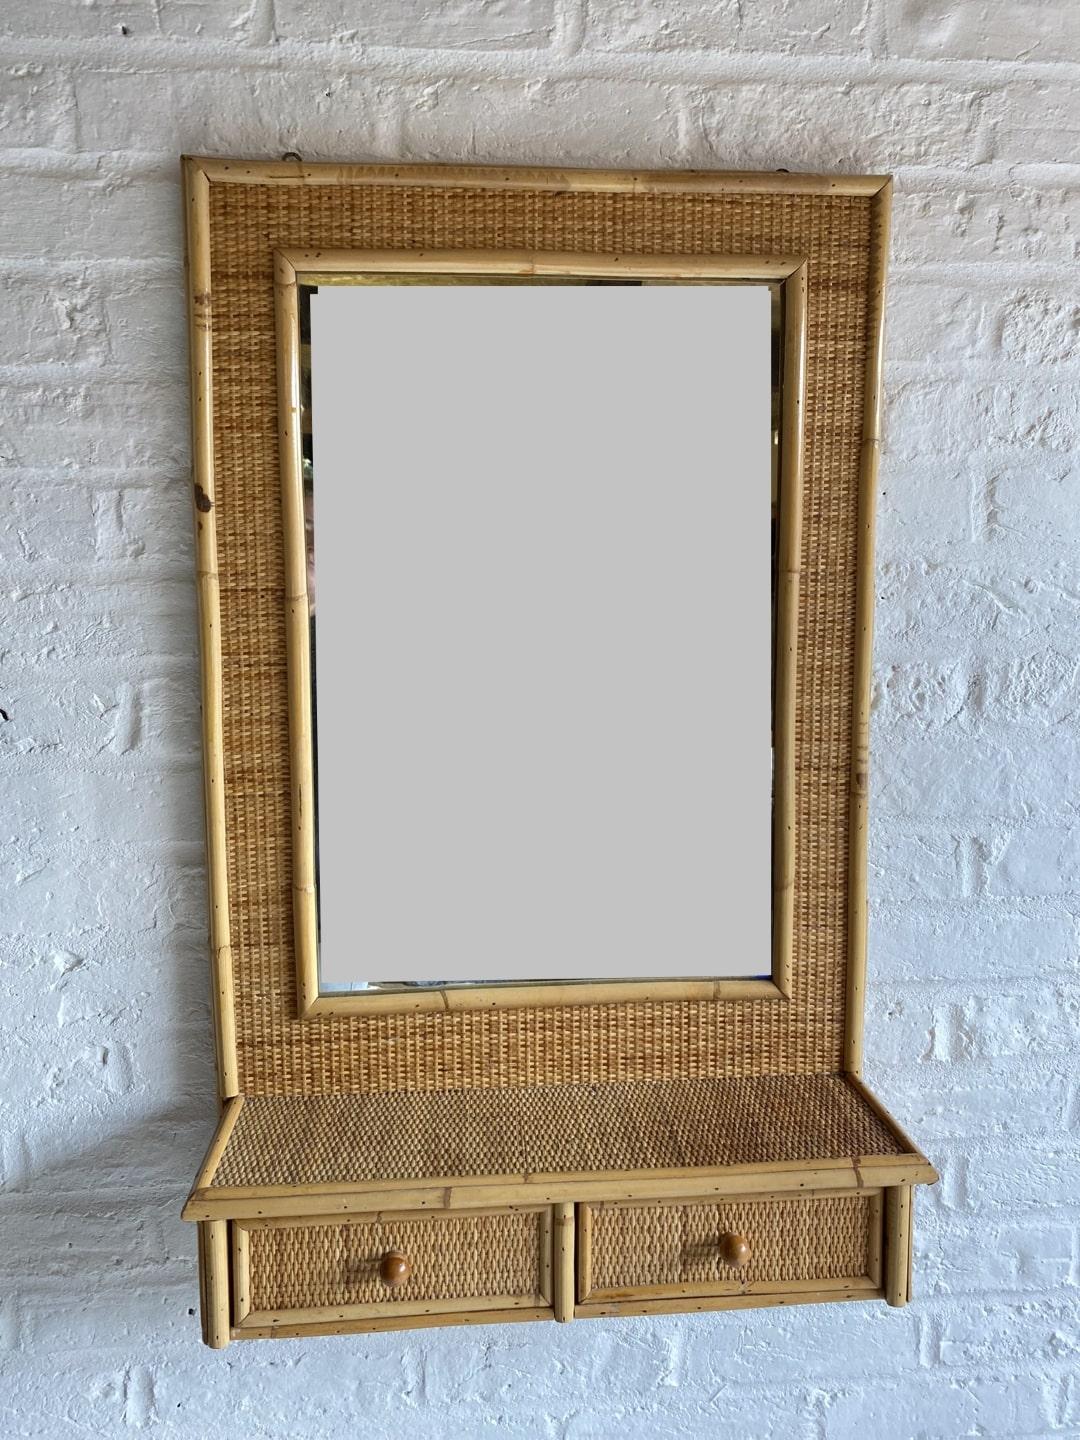 Mid Century Rattan & Cane Wall Mirror with Drawers, Italian, 1970s For Sale 1